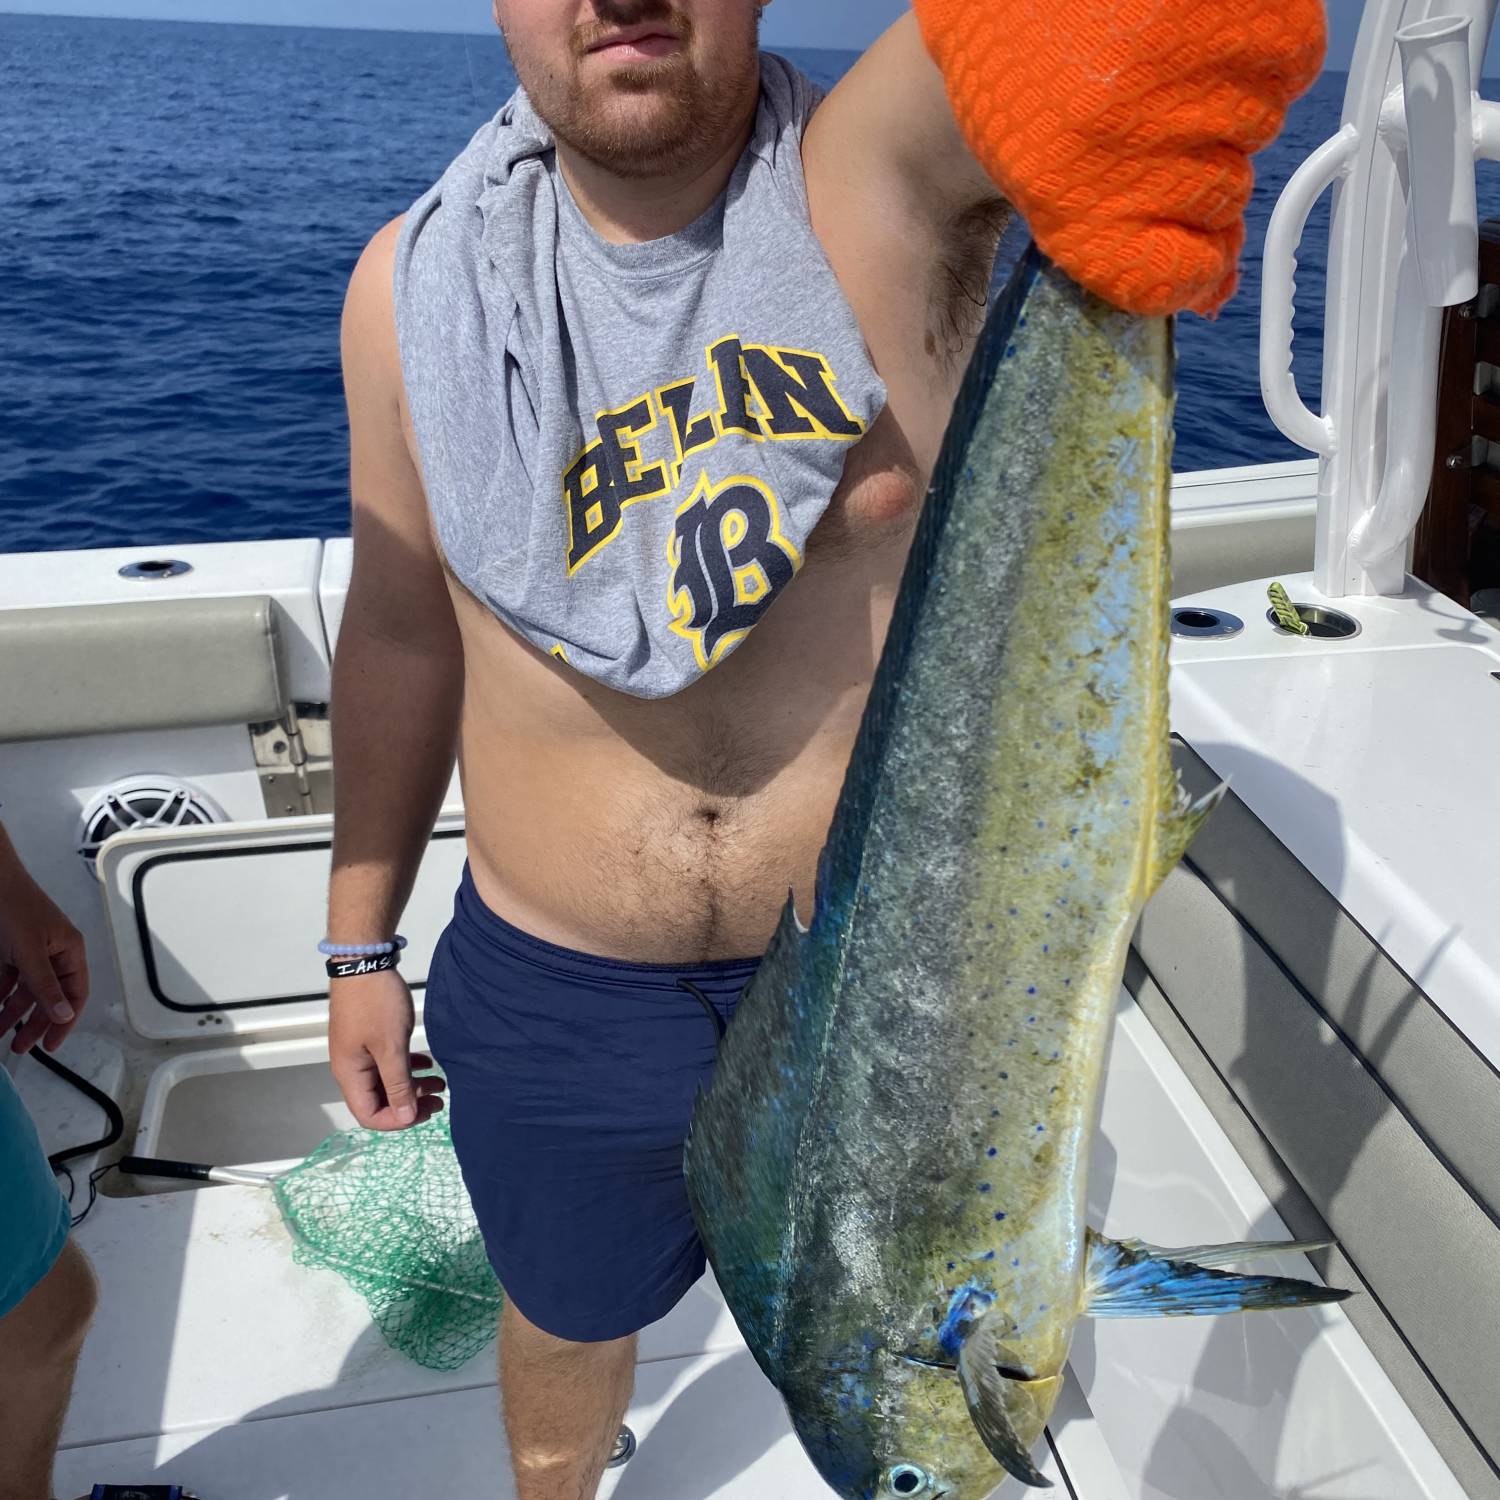 Went out early in the morning and caught a beautiful mahi offshore in the Florida keys